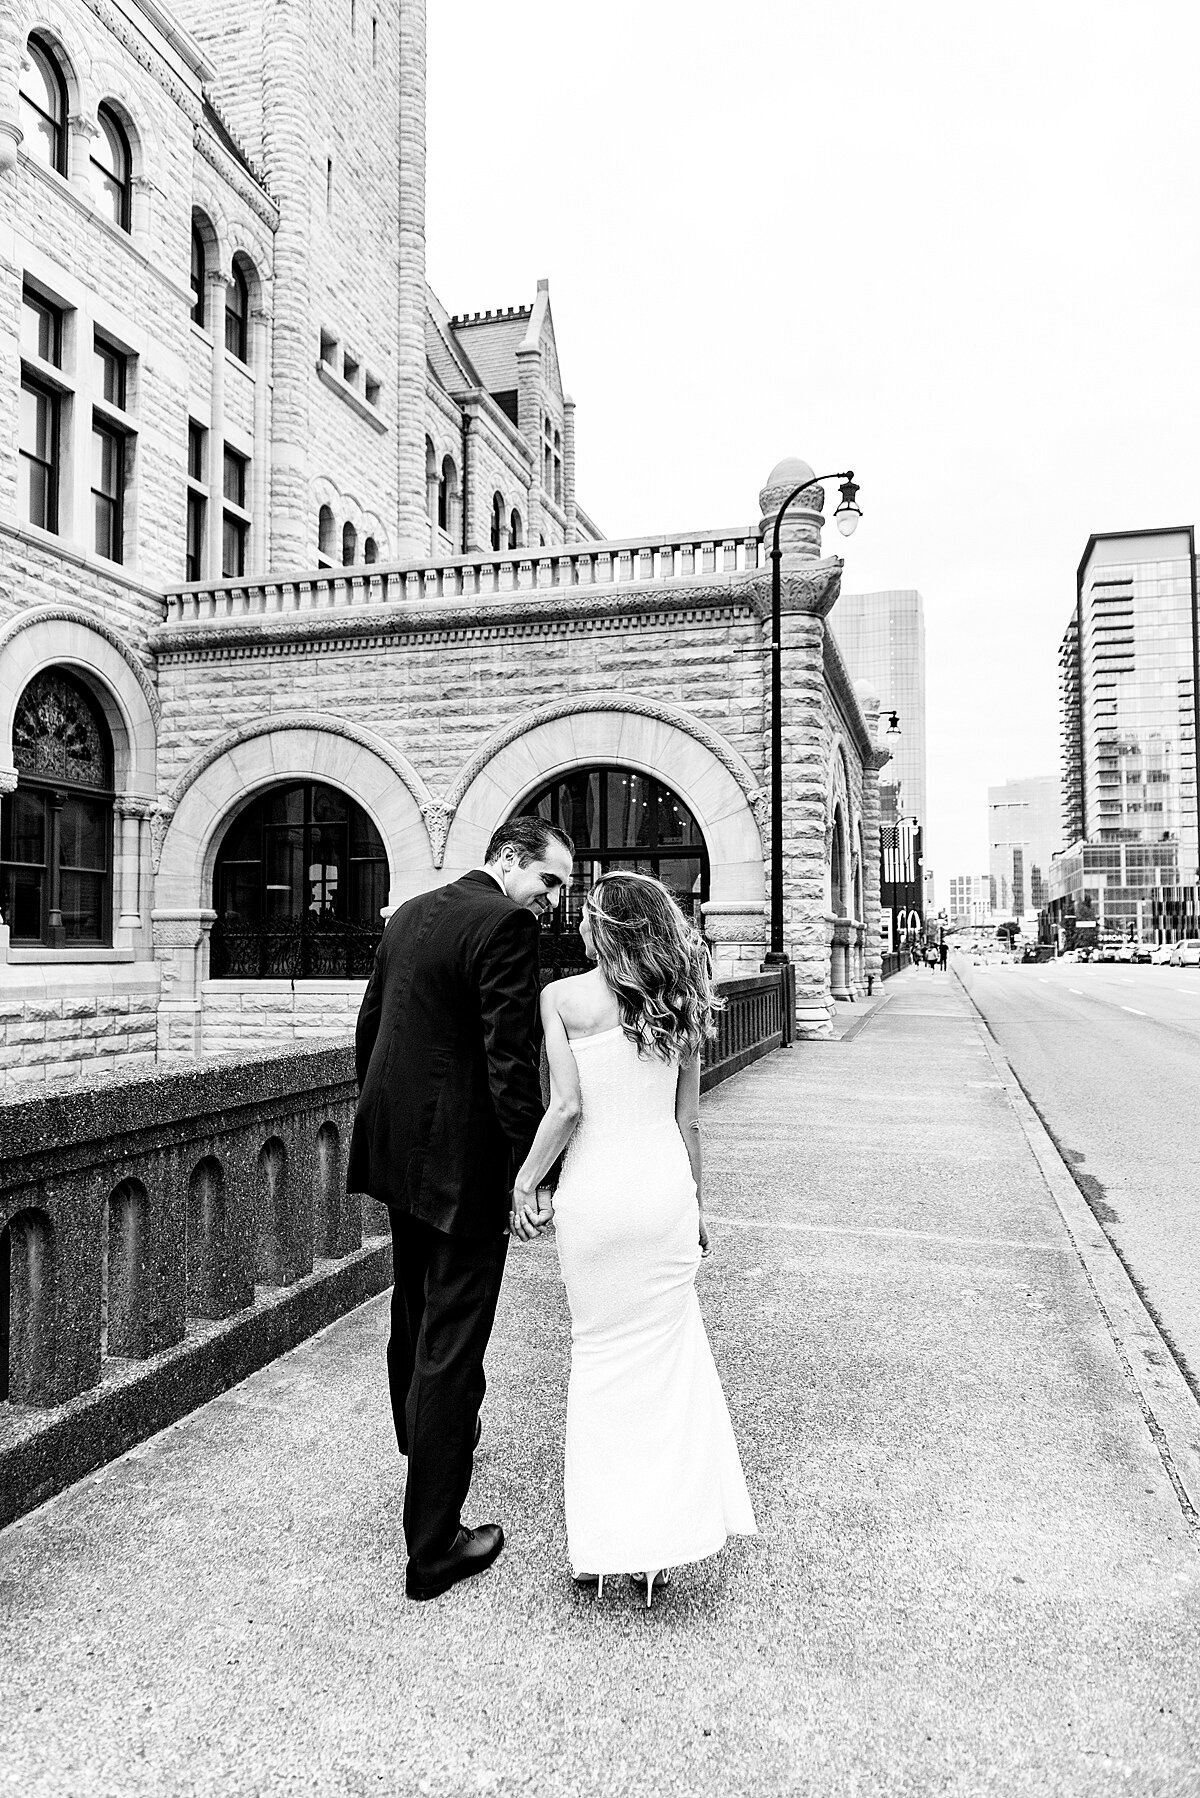 A black and white image of the bride and groom walking away while gazing up at each other holding hands in front of the Historic Union Station in Nashville. The bride is wearing a one shoulder sheath dress and the groom is wearing a black tuxedo.